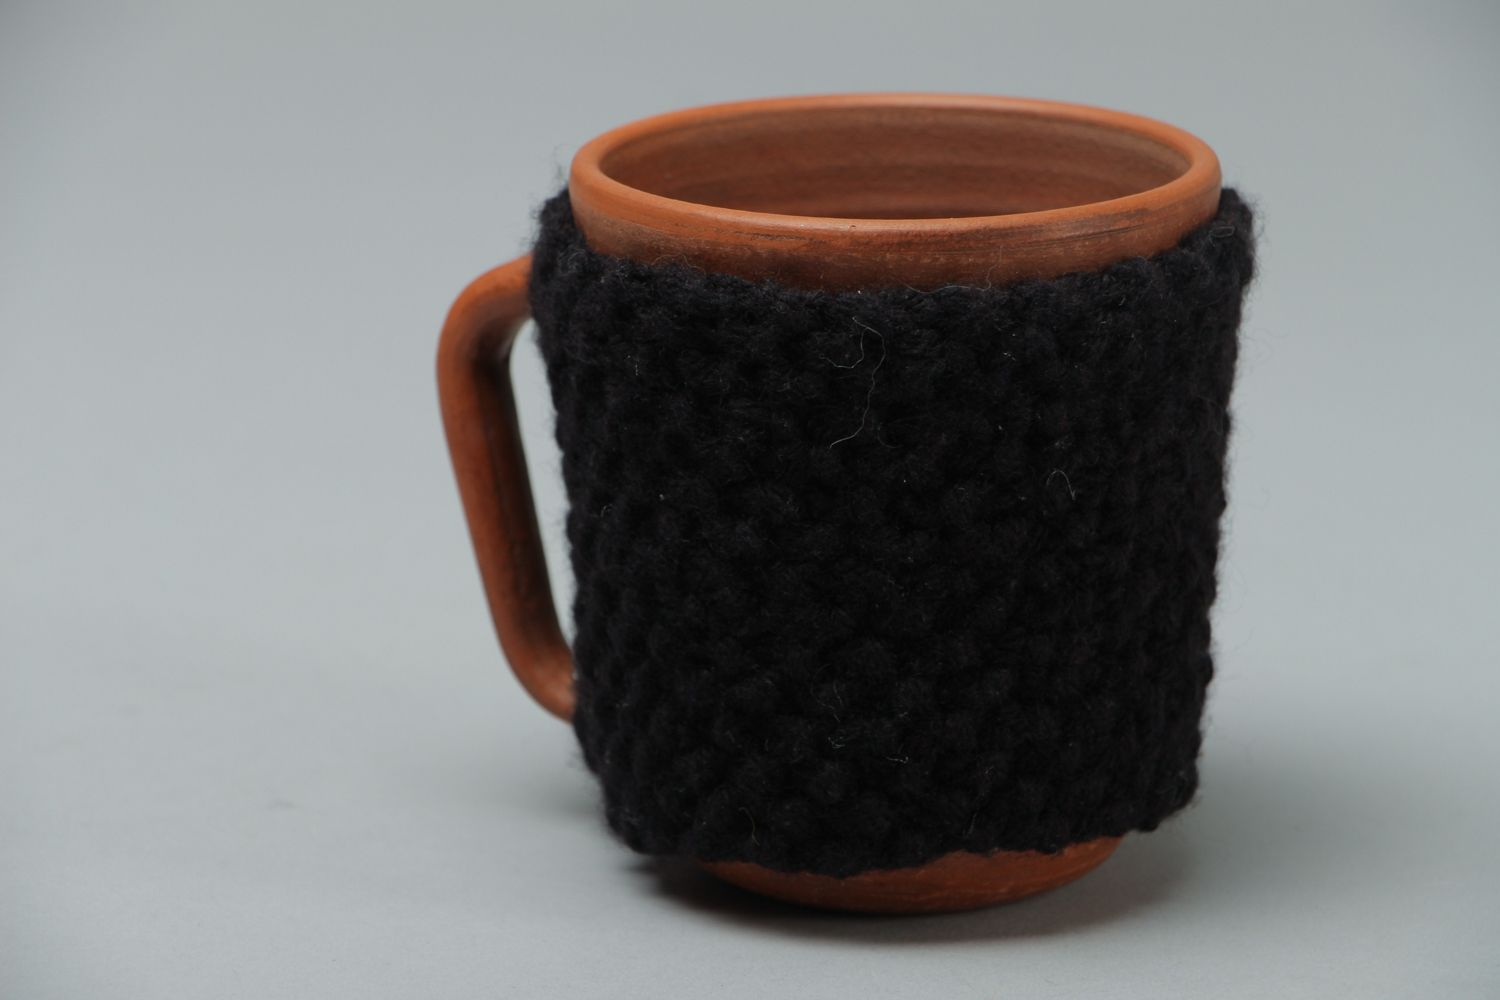 10 oz clay terracotta color cup with handle and black knitted cover photo 1